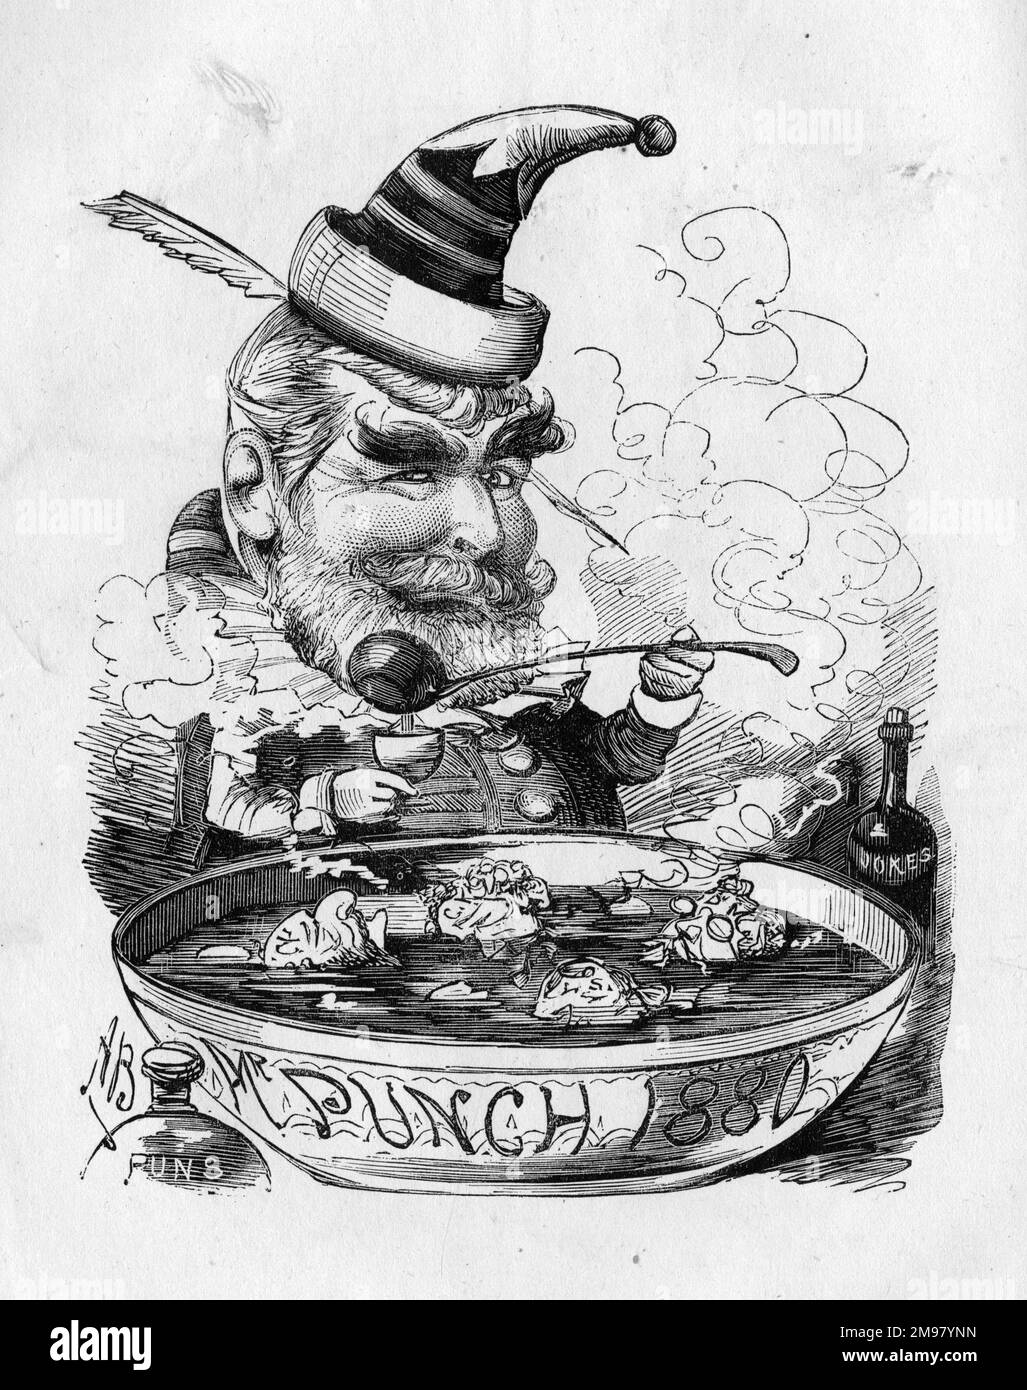 Caricature of Francis Cowley Burnand (1836-1917), newly appointed Punch editor. He was also a comic writer and playwright. Seen here as Mr Punch himself, enjoying a nice bowl of punch. Stock Photo